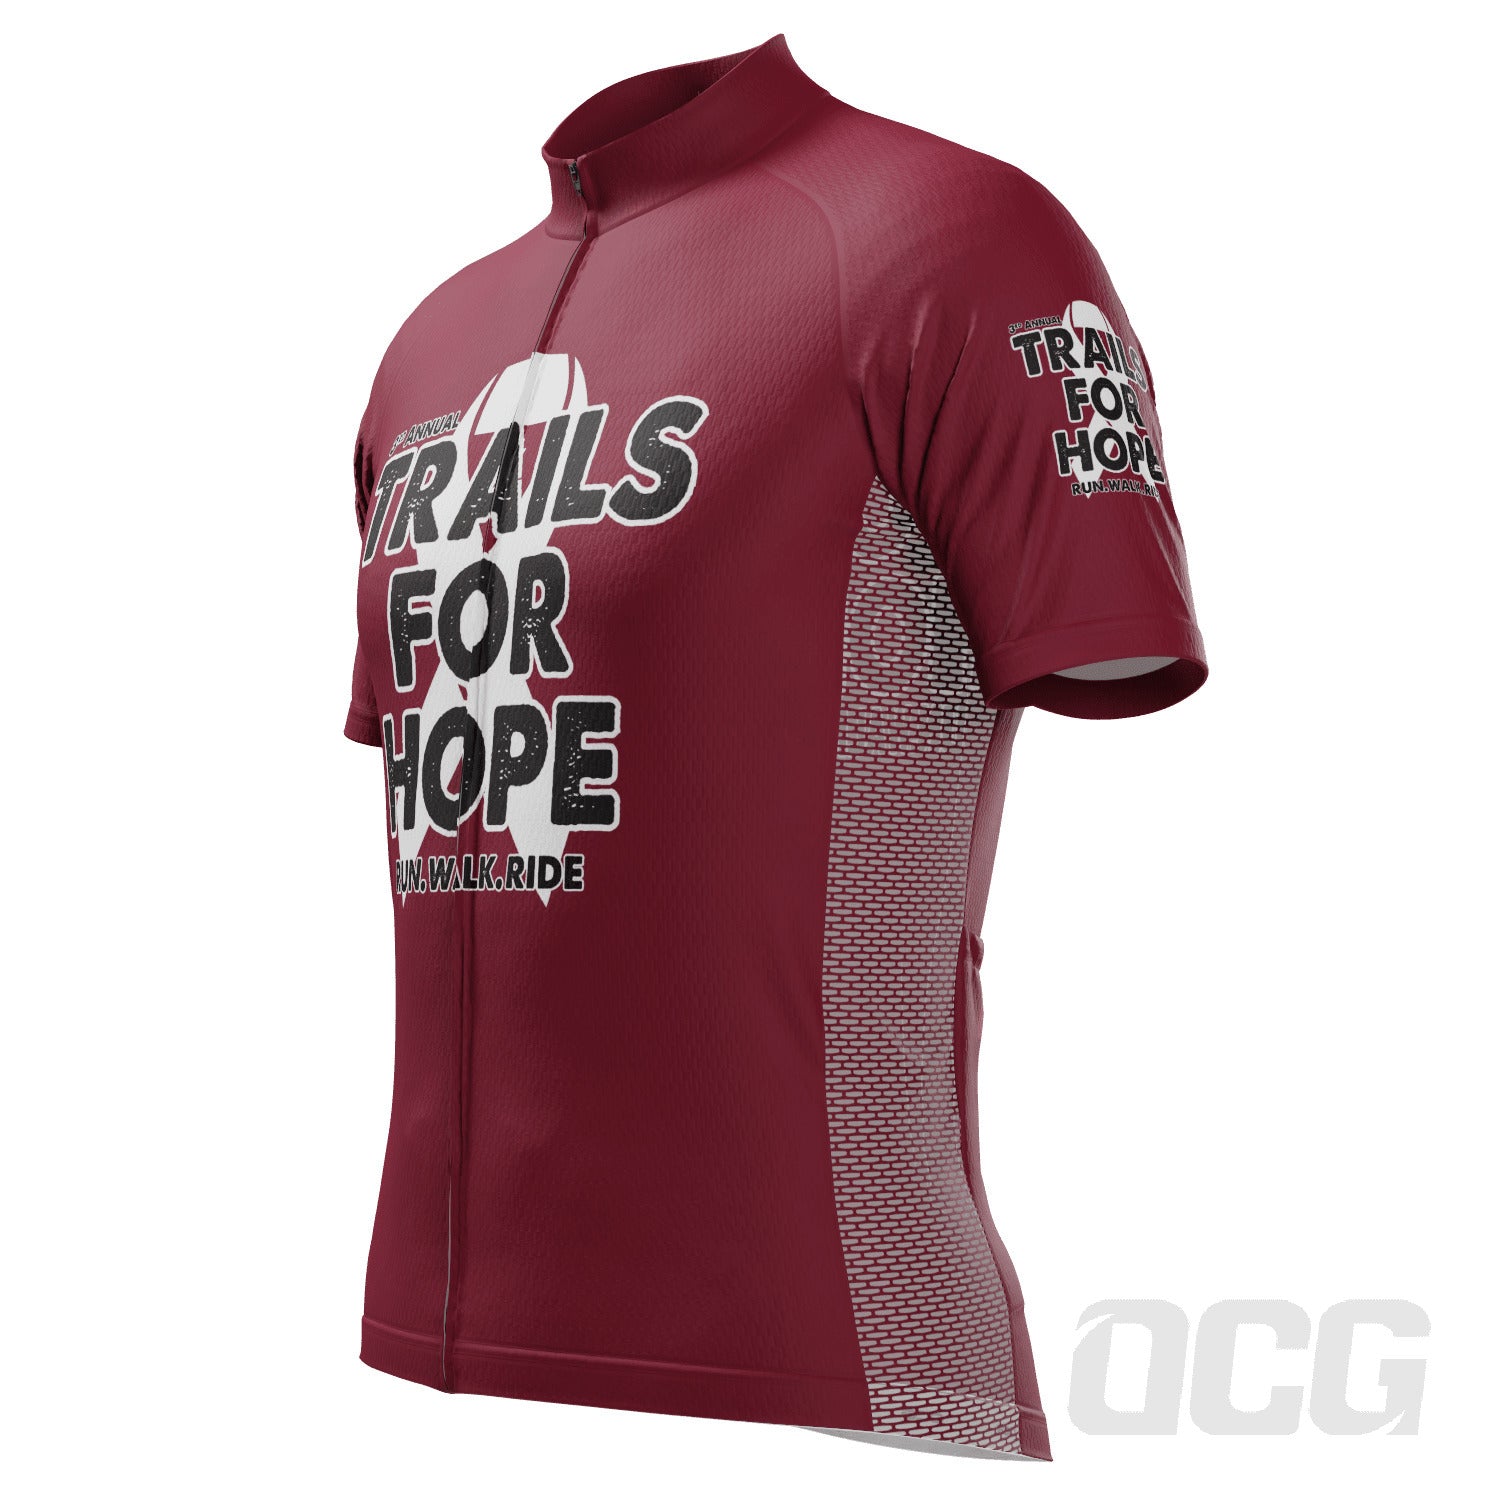 Men's 3rd Annual Trails for Hope Short Sleeve Cycling Jersey